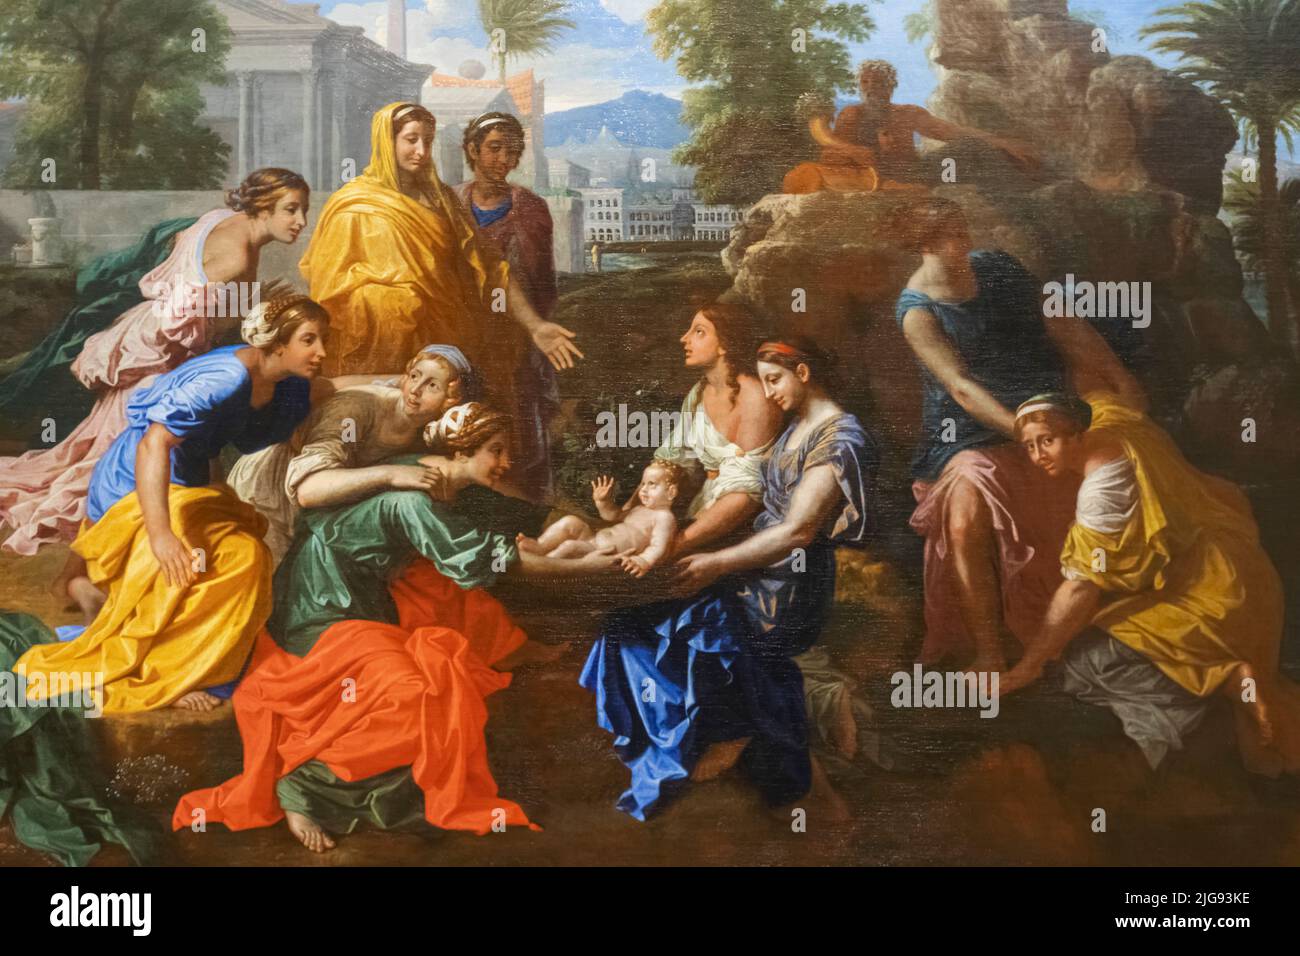 Painting titled 'The Finding of Moses' by French Artist Nicolas Poussin dated 1651 Stock Photo